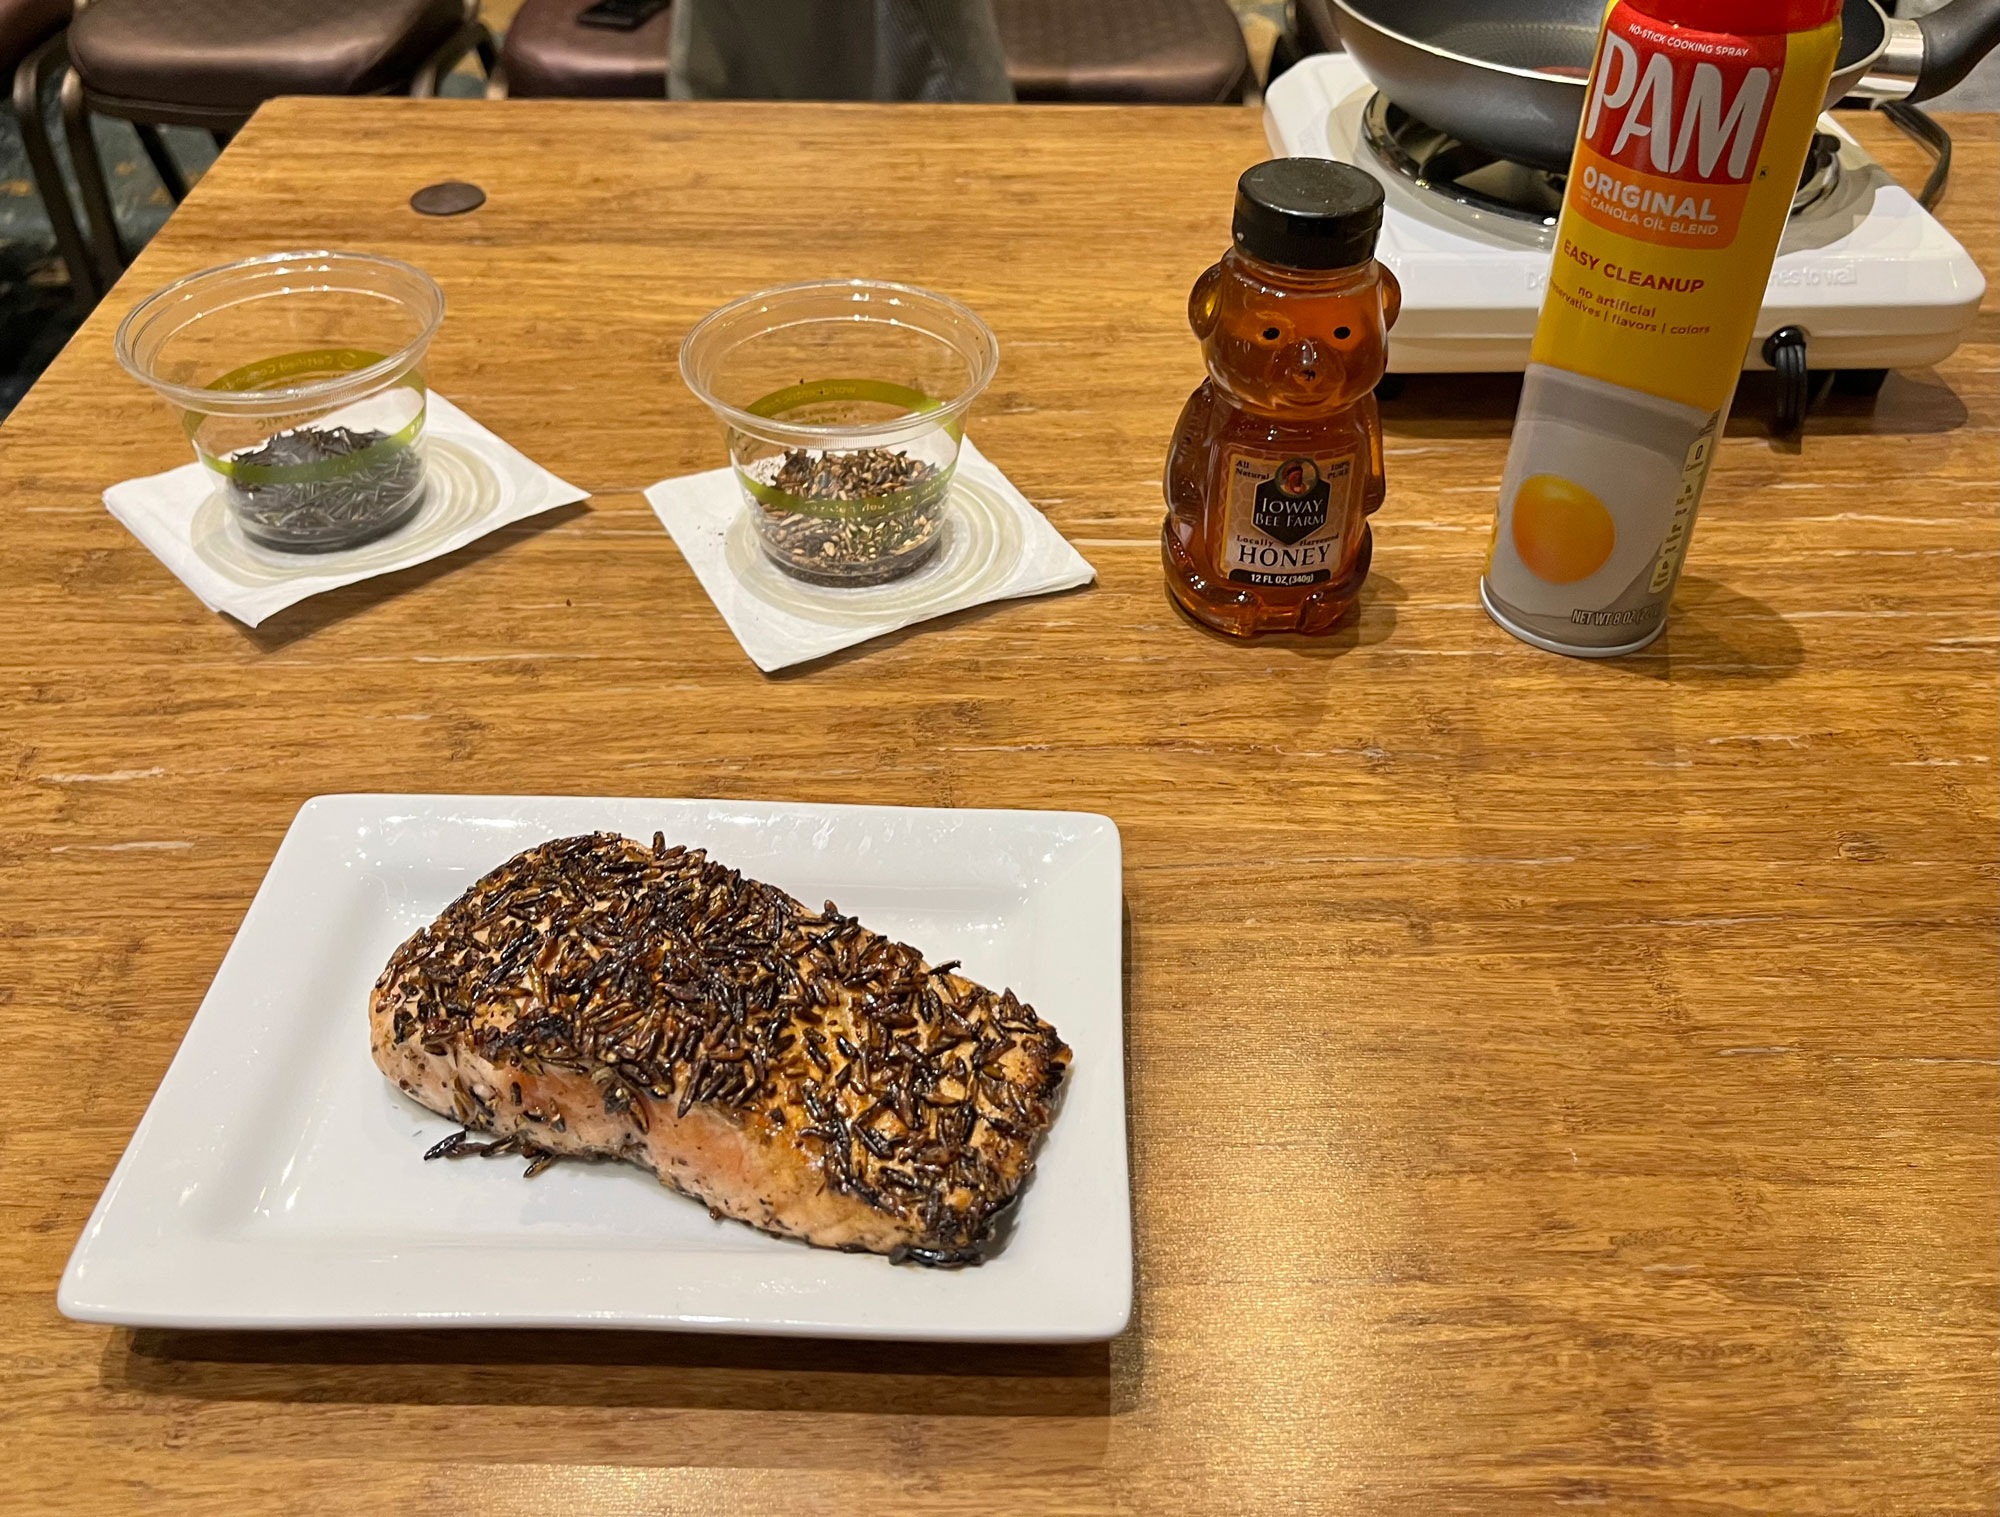 A filet of salmon encrusted in a wild rice coating rests on a white plate